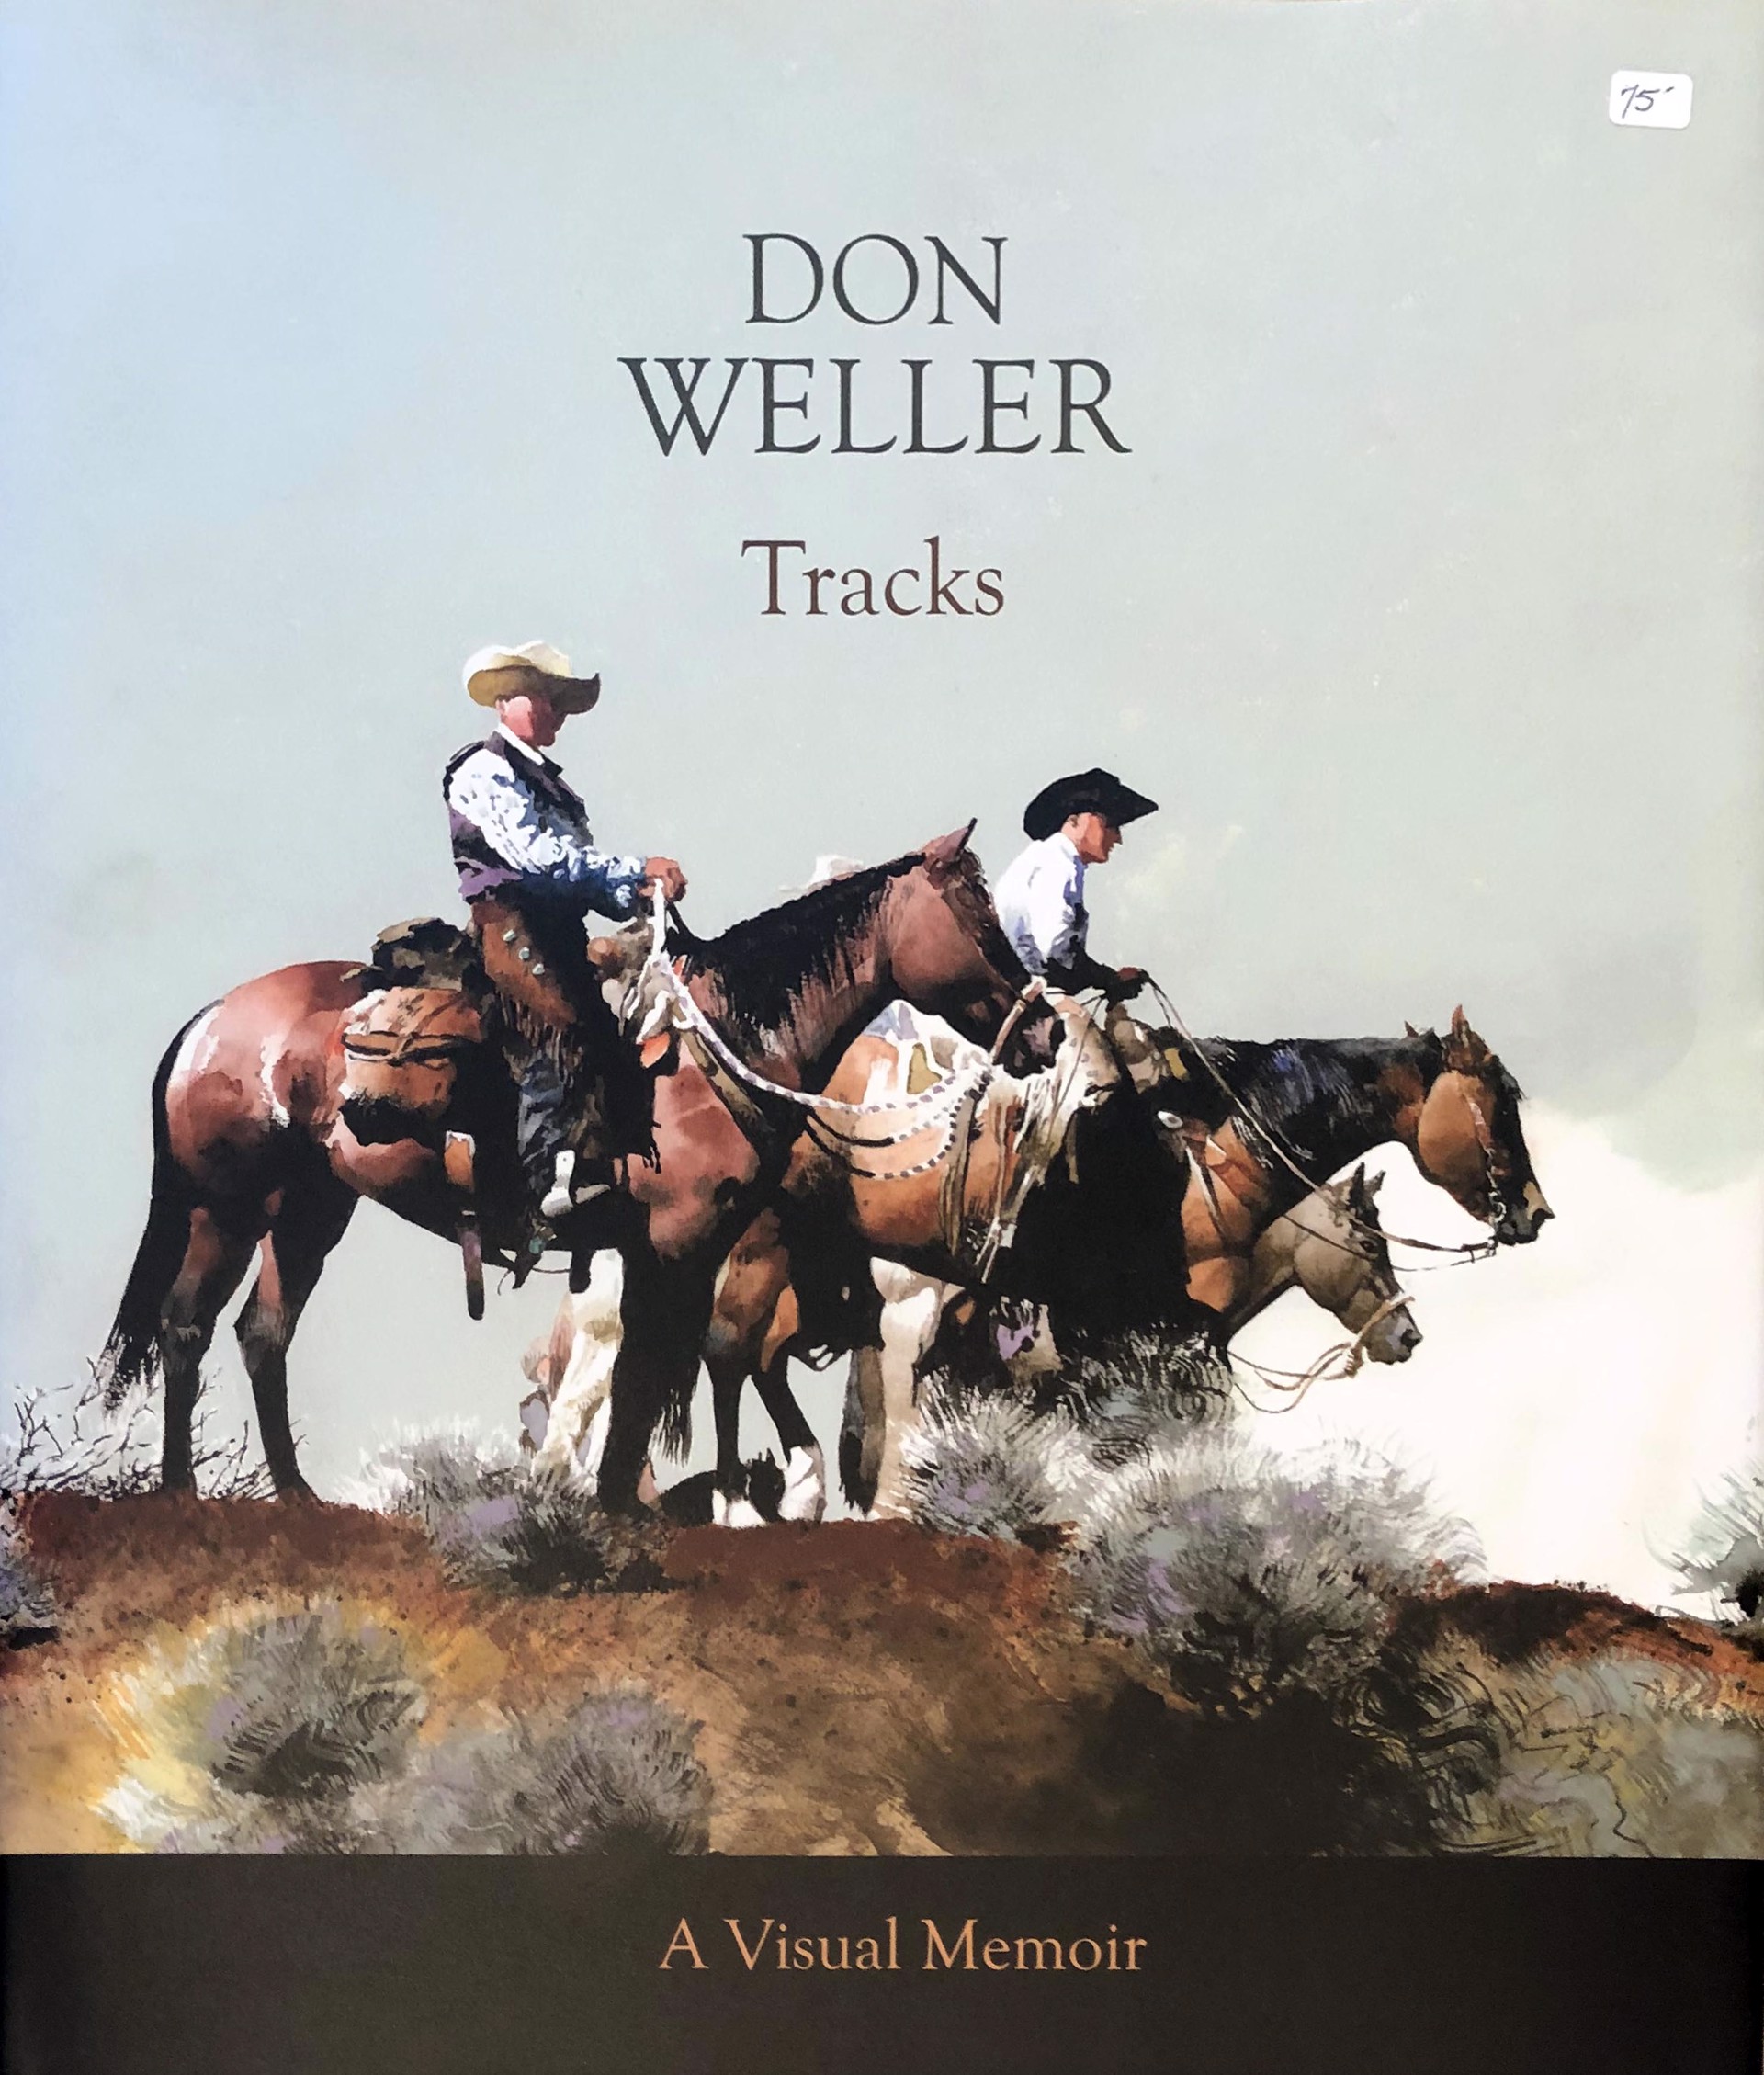 Tracks by Don Weller